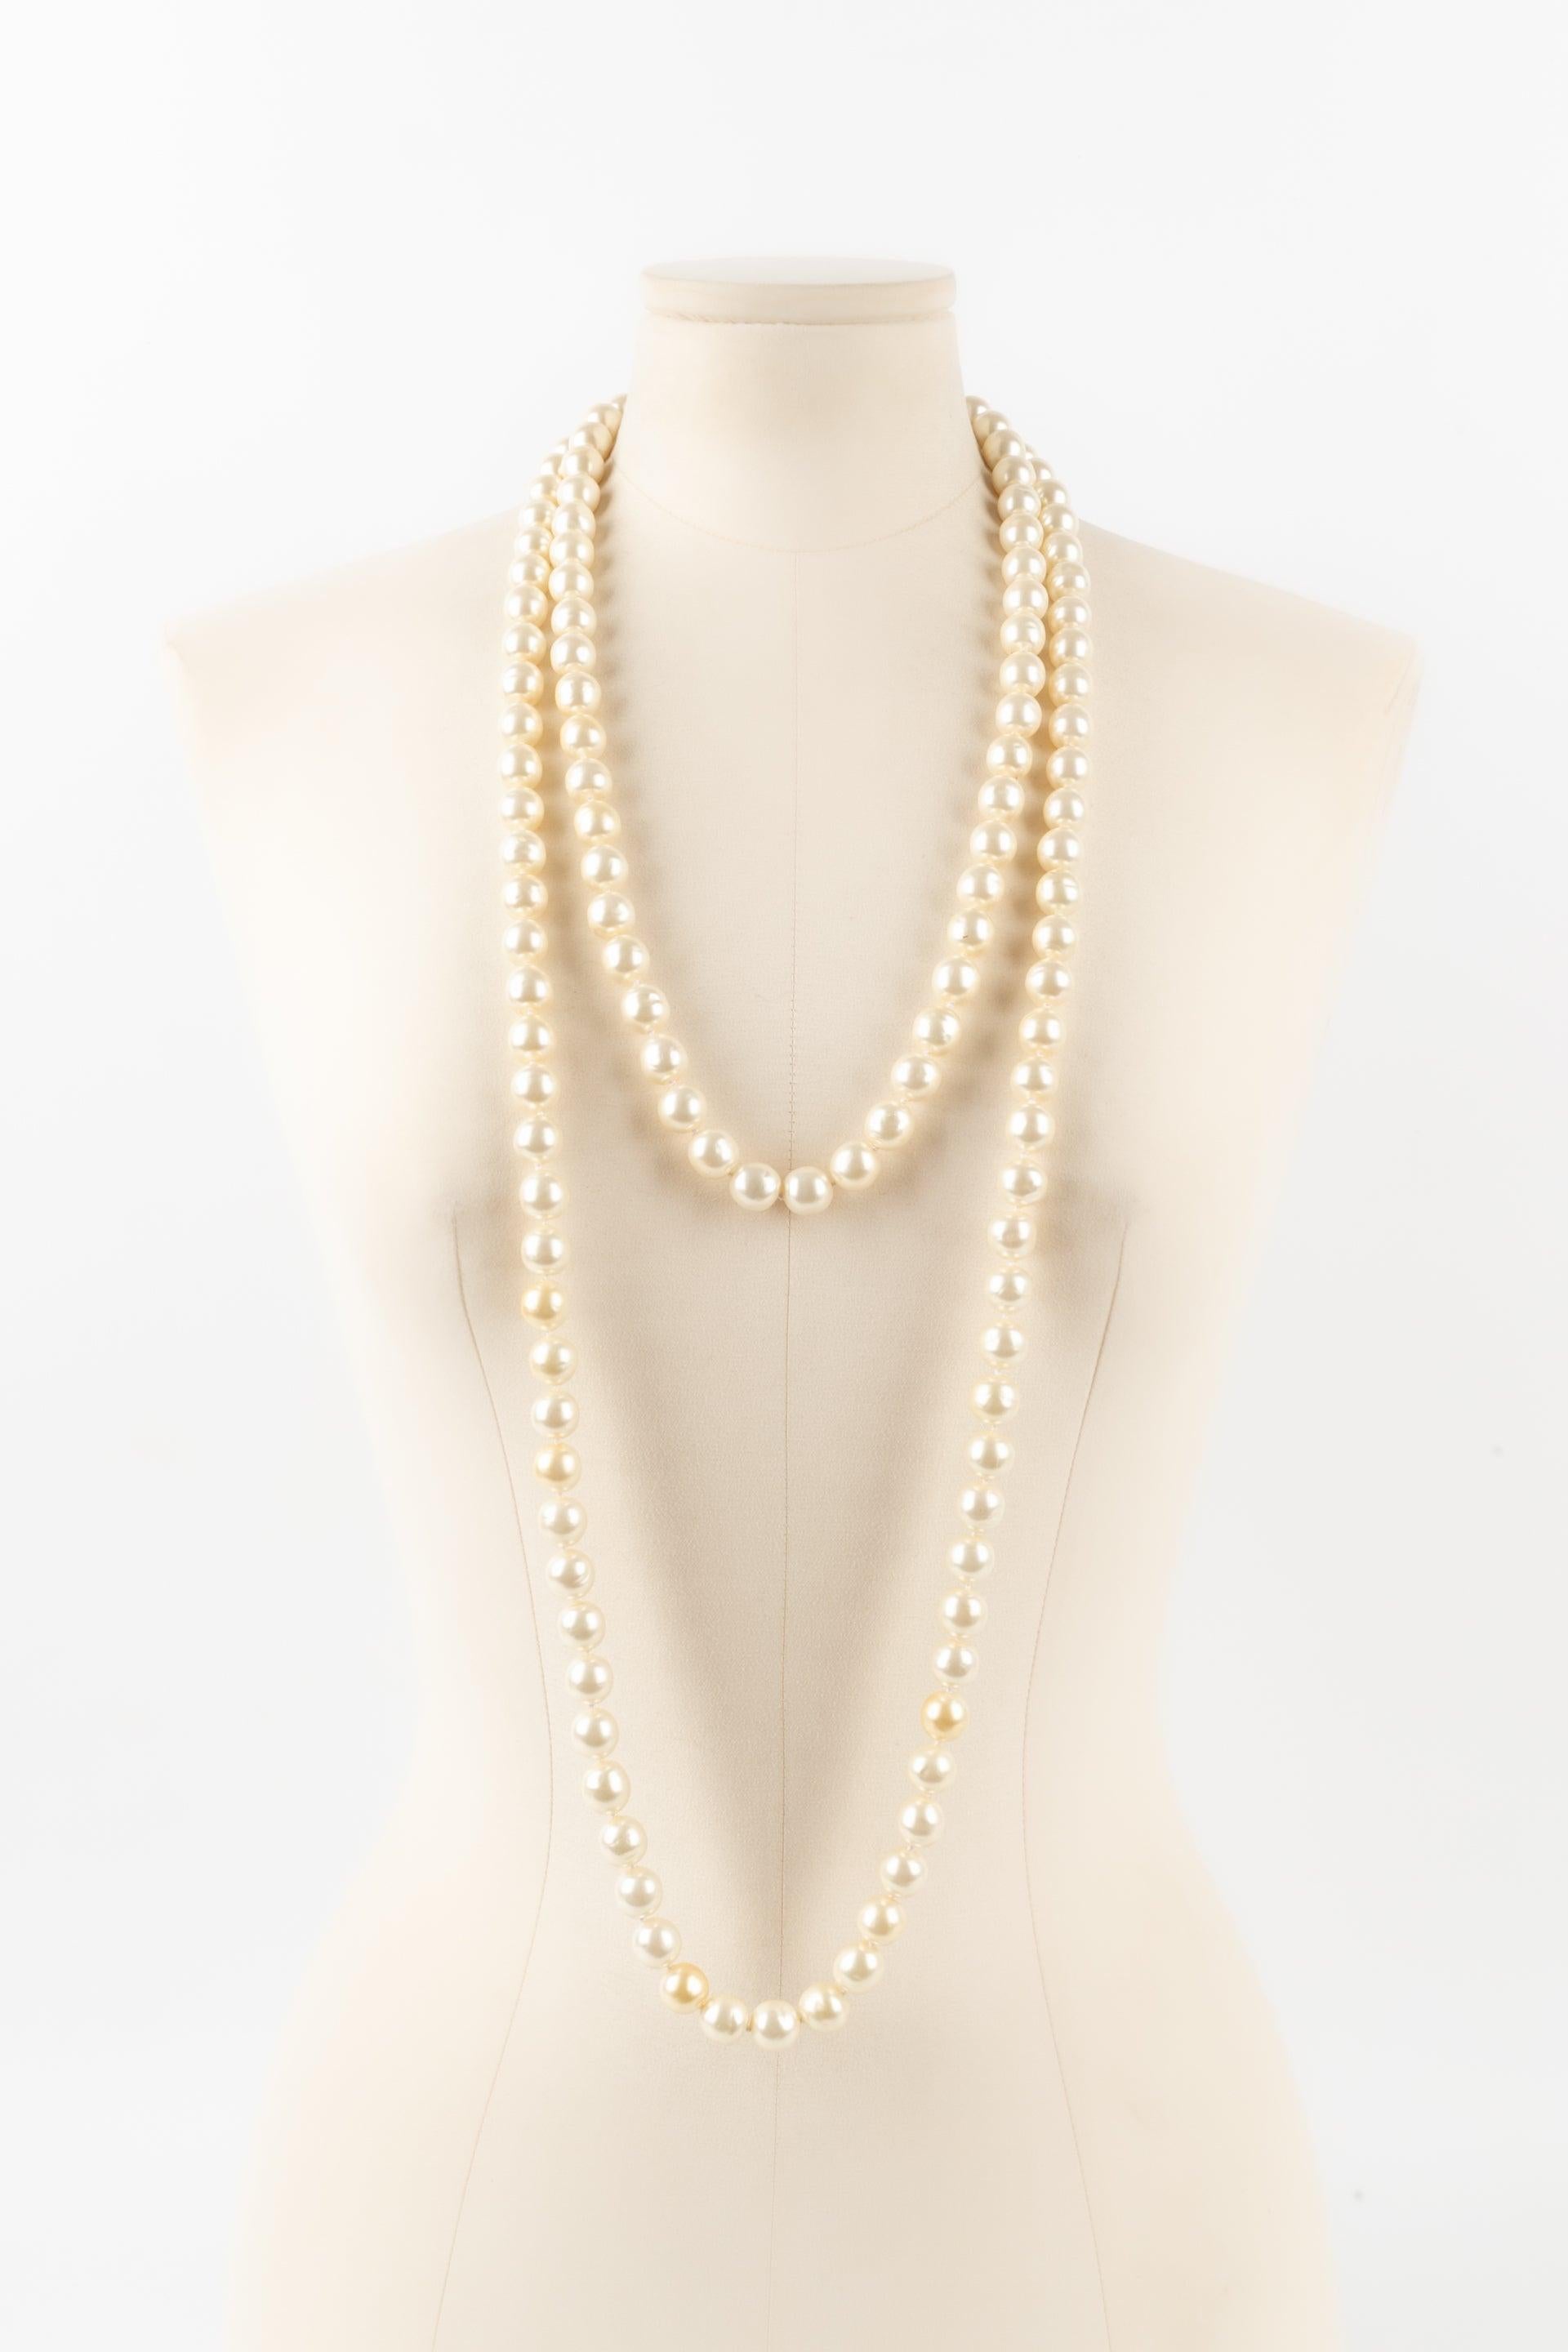 Chanel - (Made in France) Golden metal sautoir with costume pearls and blue glass paste.

Additional information:
Condition: Very good condition
Dimensions: Length: 180 cm

Seller Reference: CB222